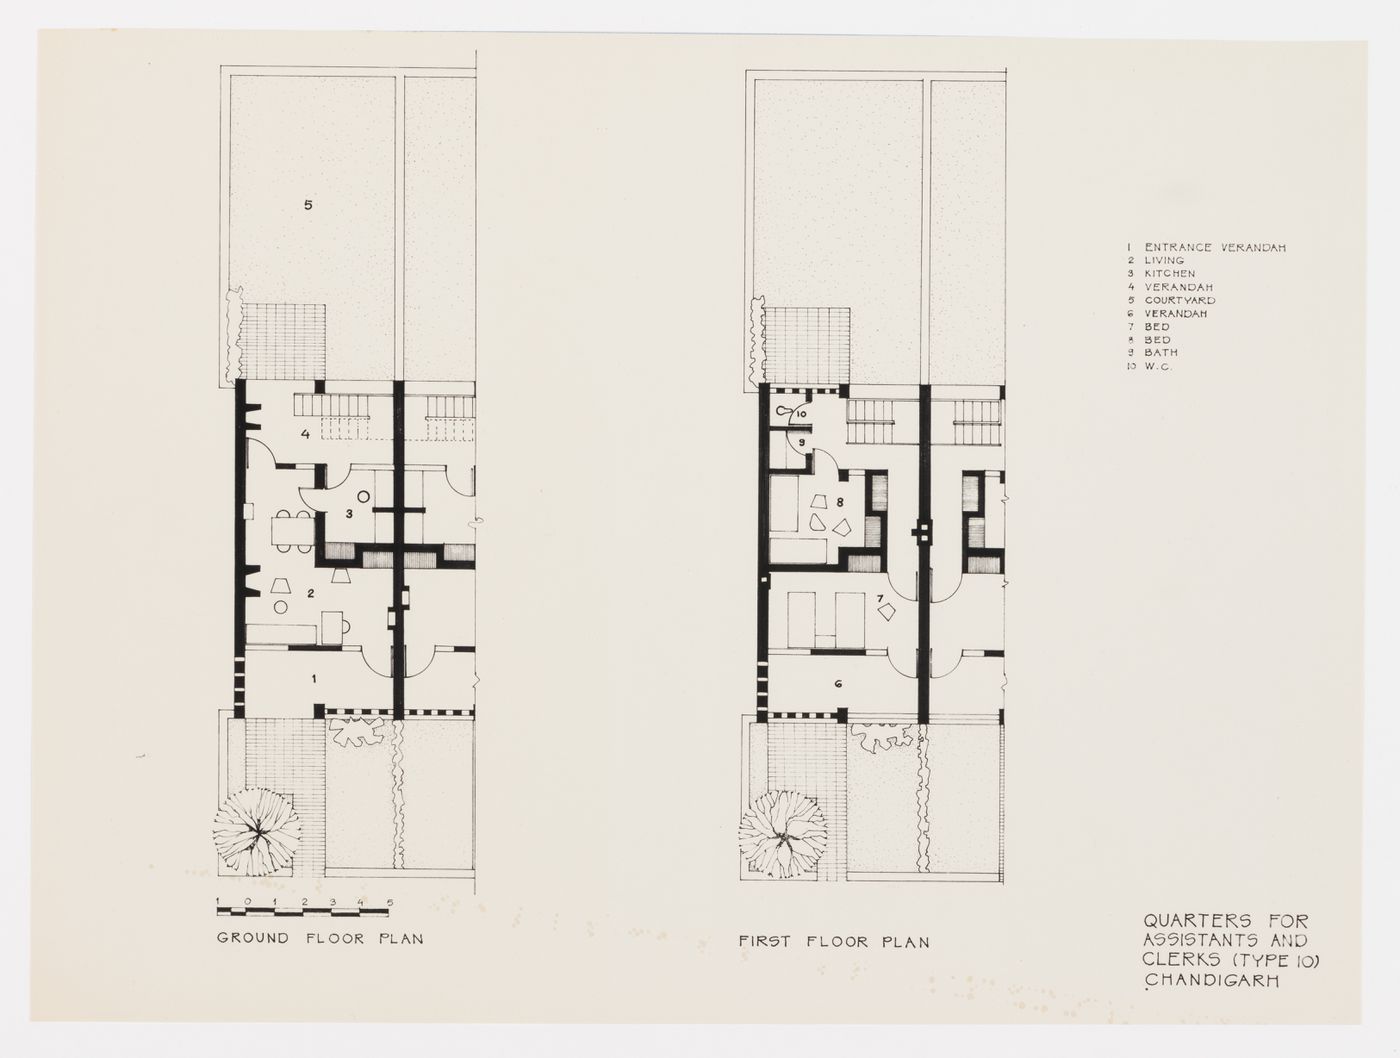 Floor plans for the Quarters for Assistants and Clerks, House type 10, in Chandigarh, India